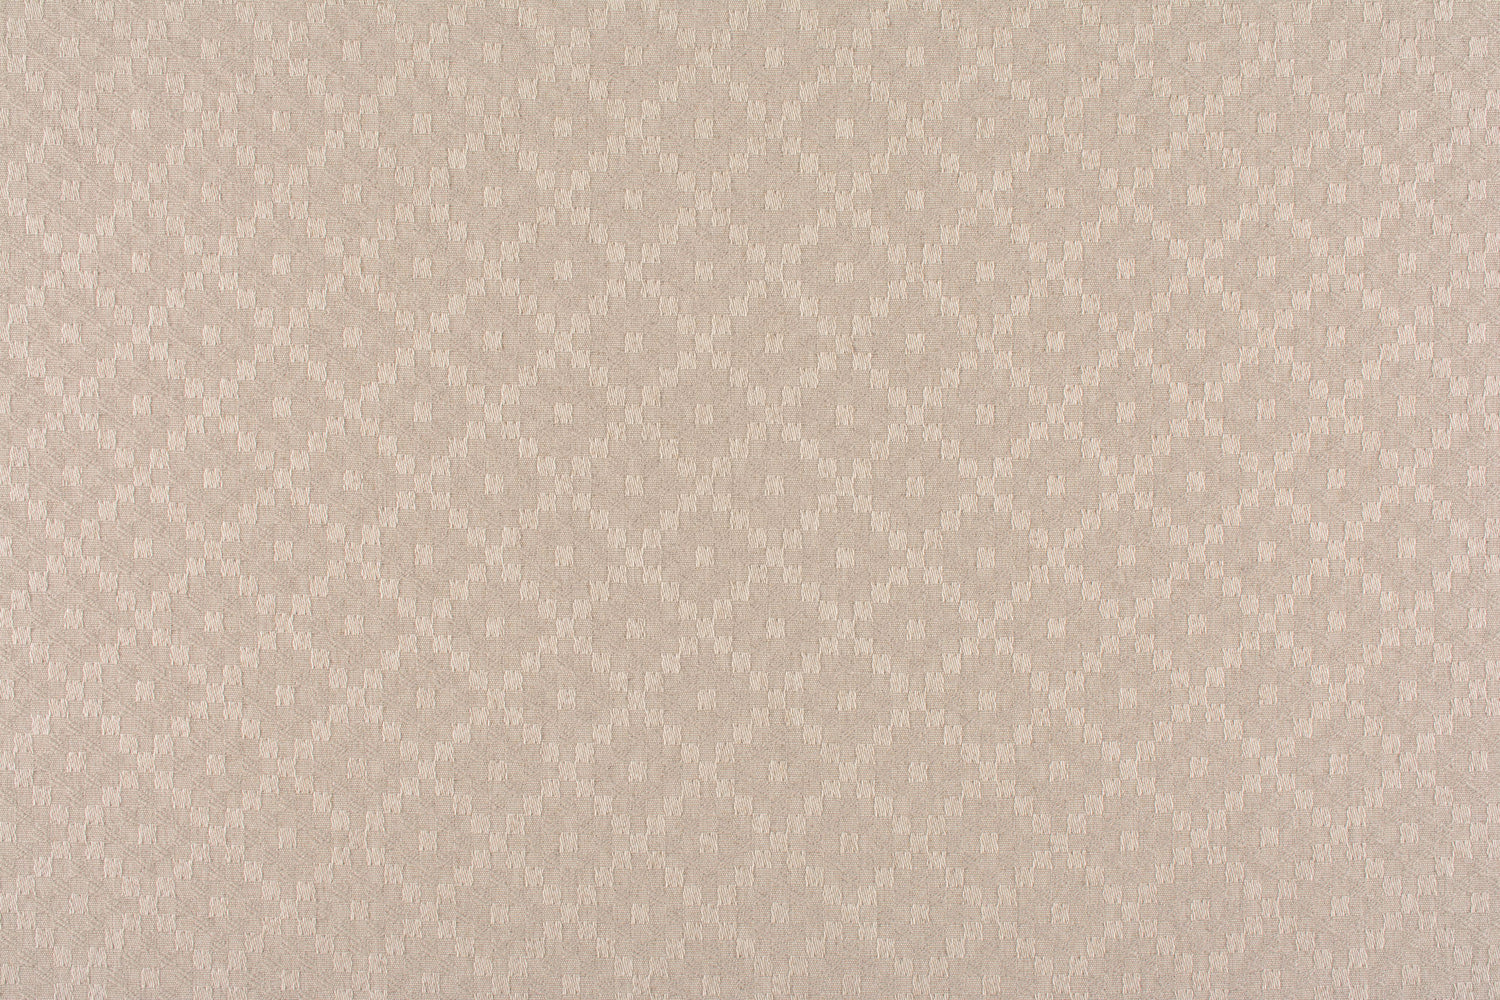 Lorcan fabric in linen color - pattern number VW 0003FC01 - by Scalamandre in the Old World Weavers collection